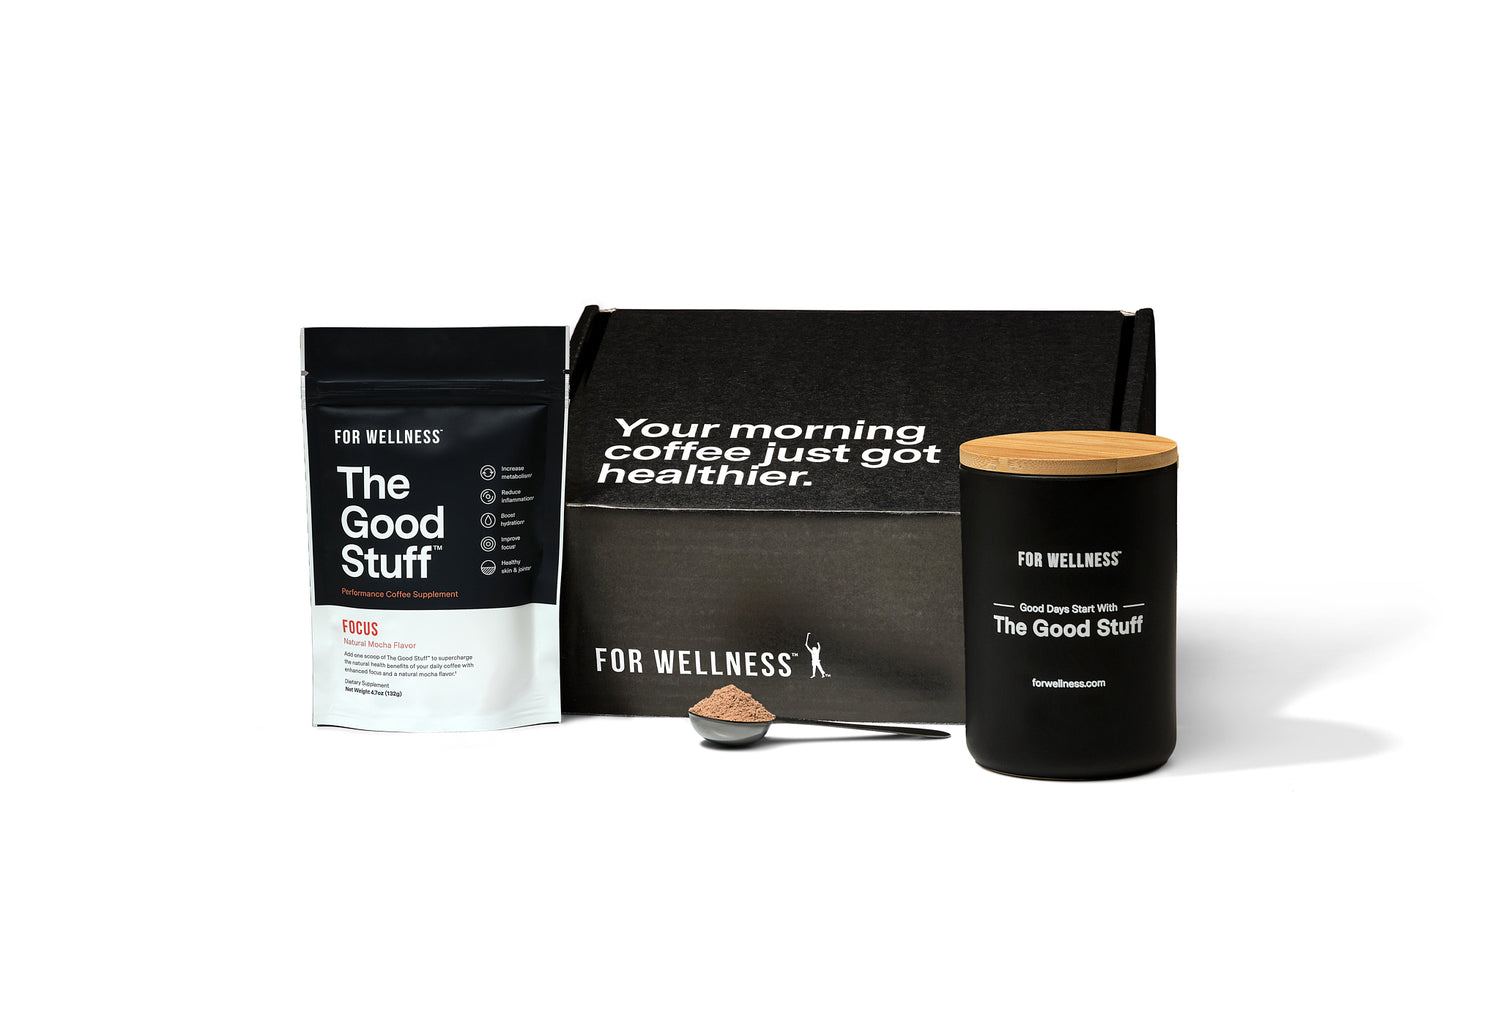 For Wellness Review: Just How Good Is The Good Stuff™